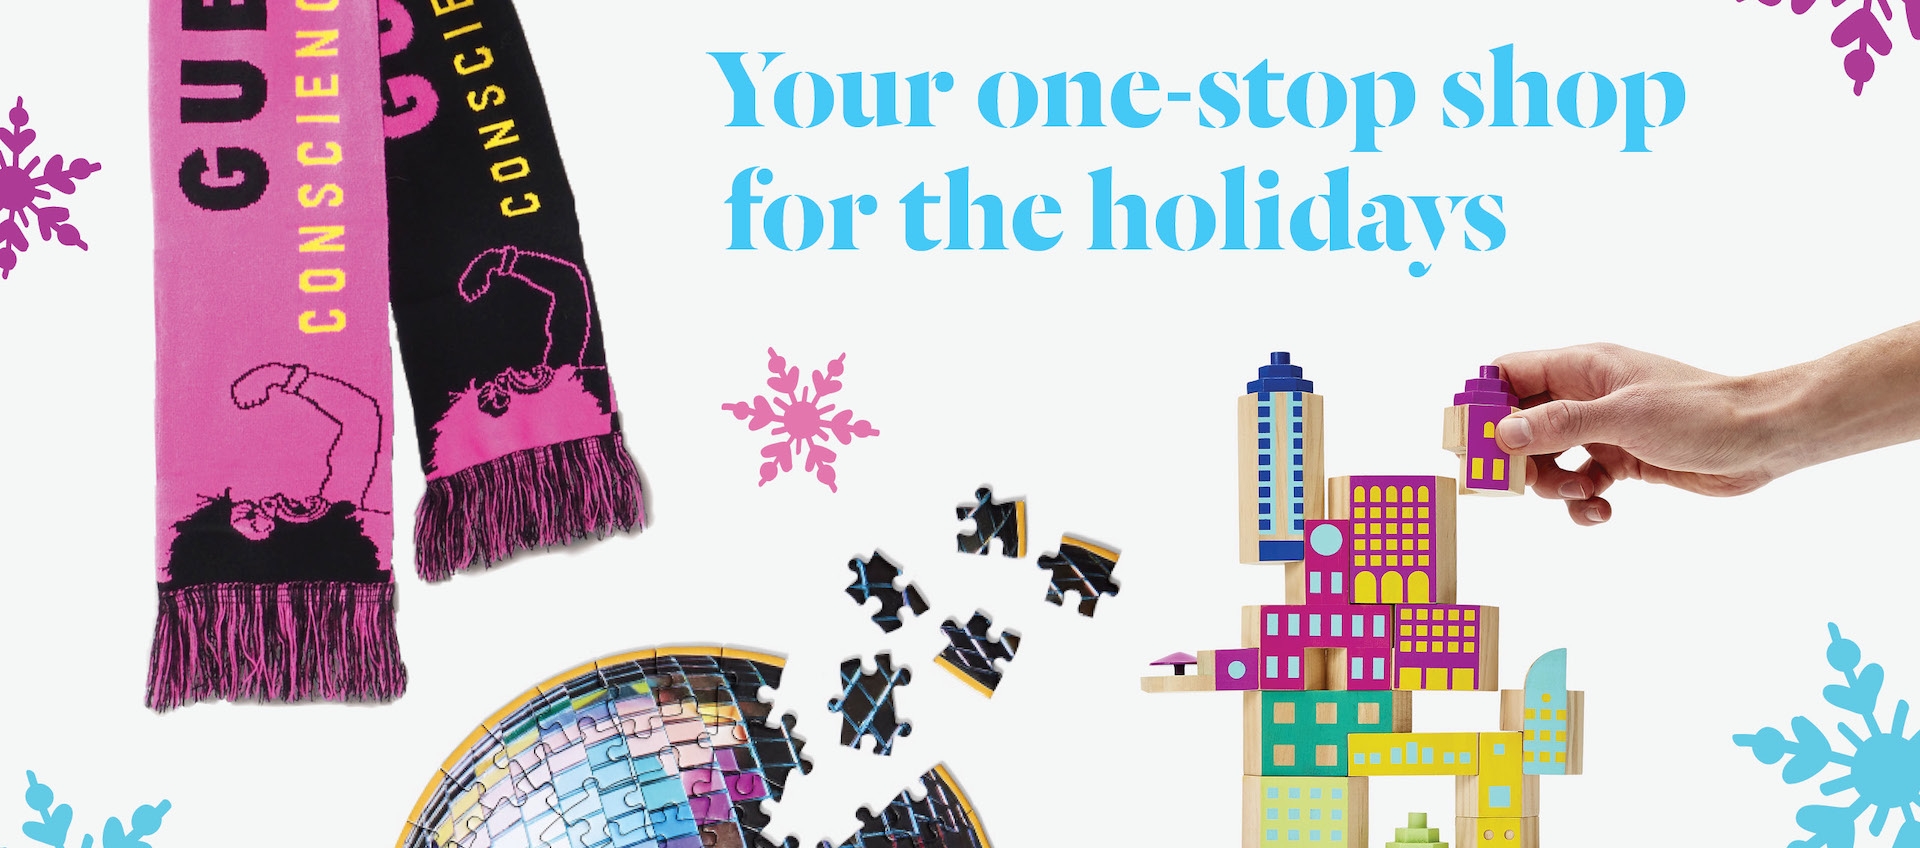 A pink and black knit Guerilla Girls scarf, a jigsaw puzzle and a building block set against a white background marked with pink and blue snowflakes and the phrase "your one-stop shop for the holidays"